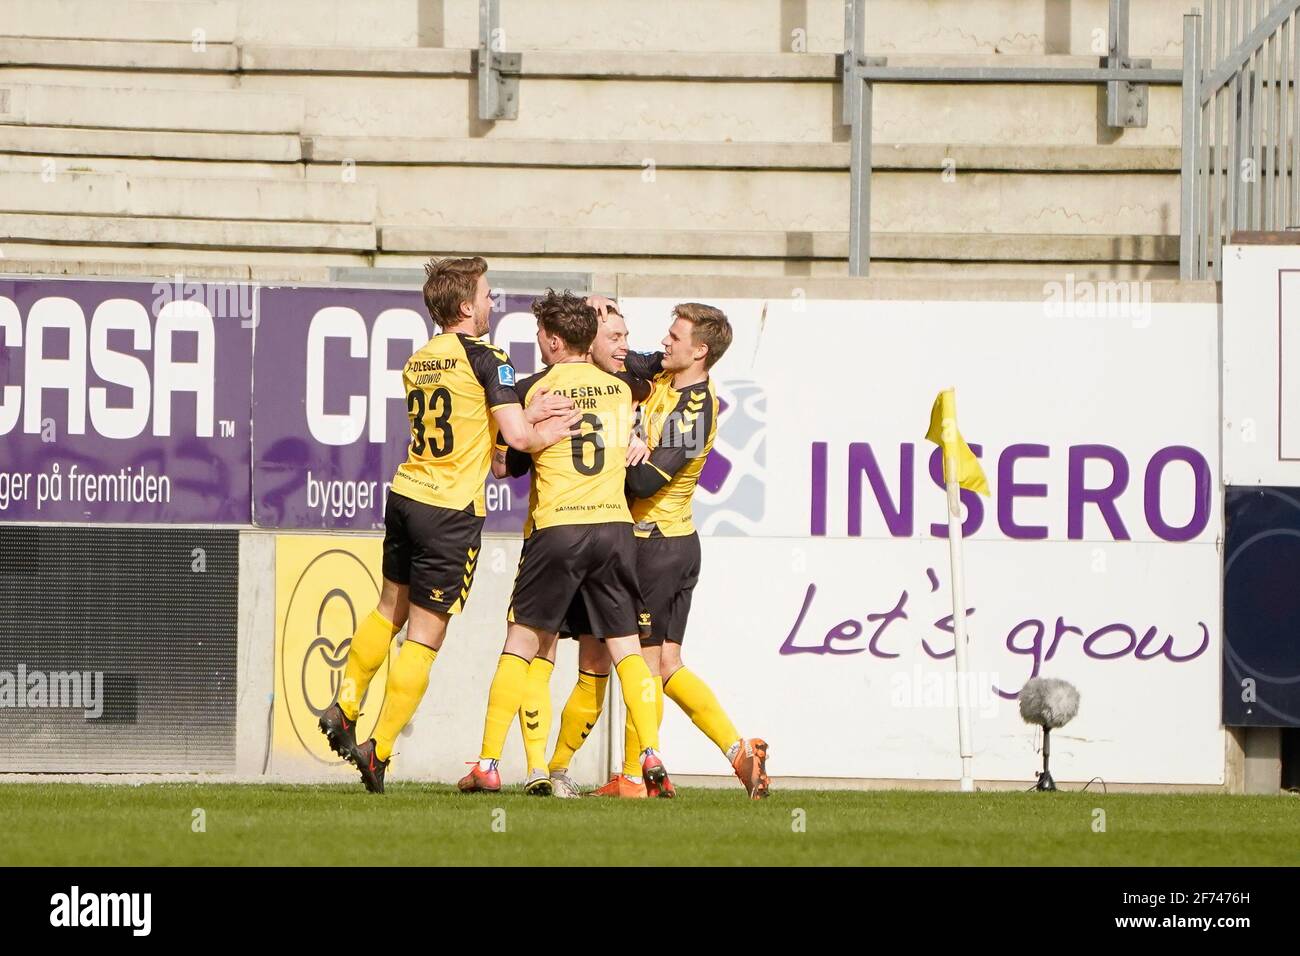 Horsens, Denmark. 04th Apr, 2021. Louka Prip (9) of AC Horsens scores for  1-0 during the 3F Superliga match between AC Horsens and Odense Boldklub at  Casa Arena in Horsens. (Photo Credit: